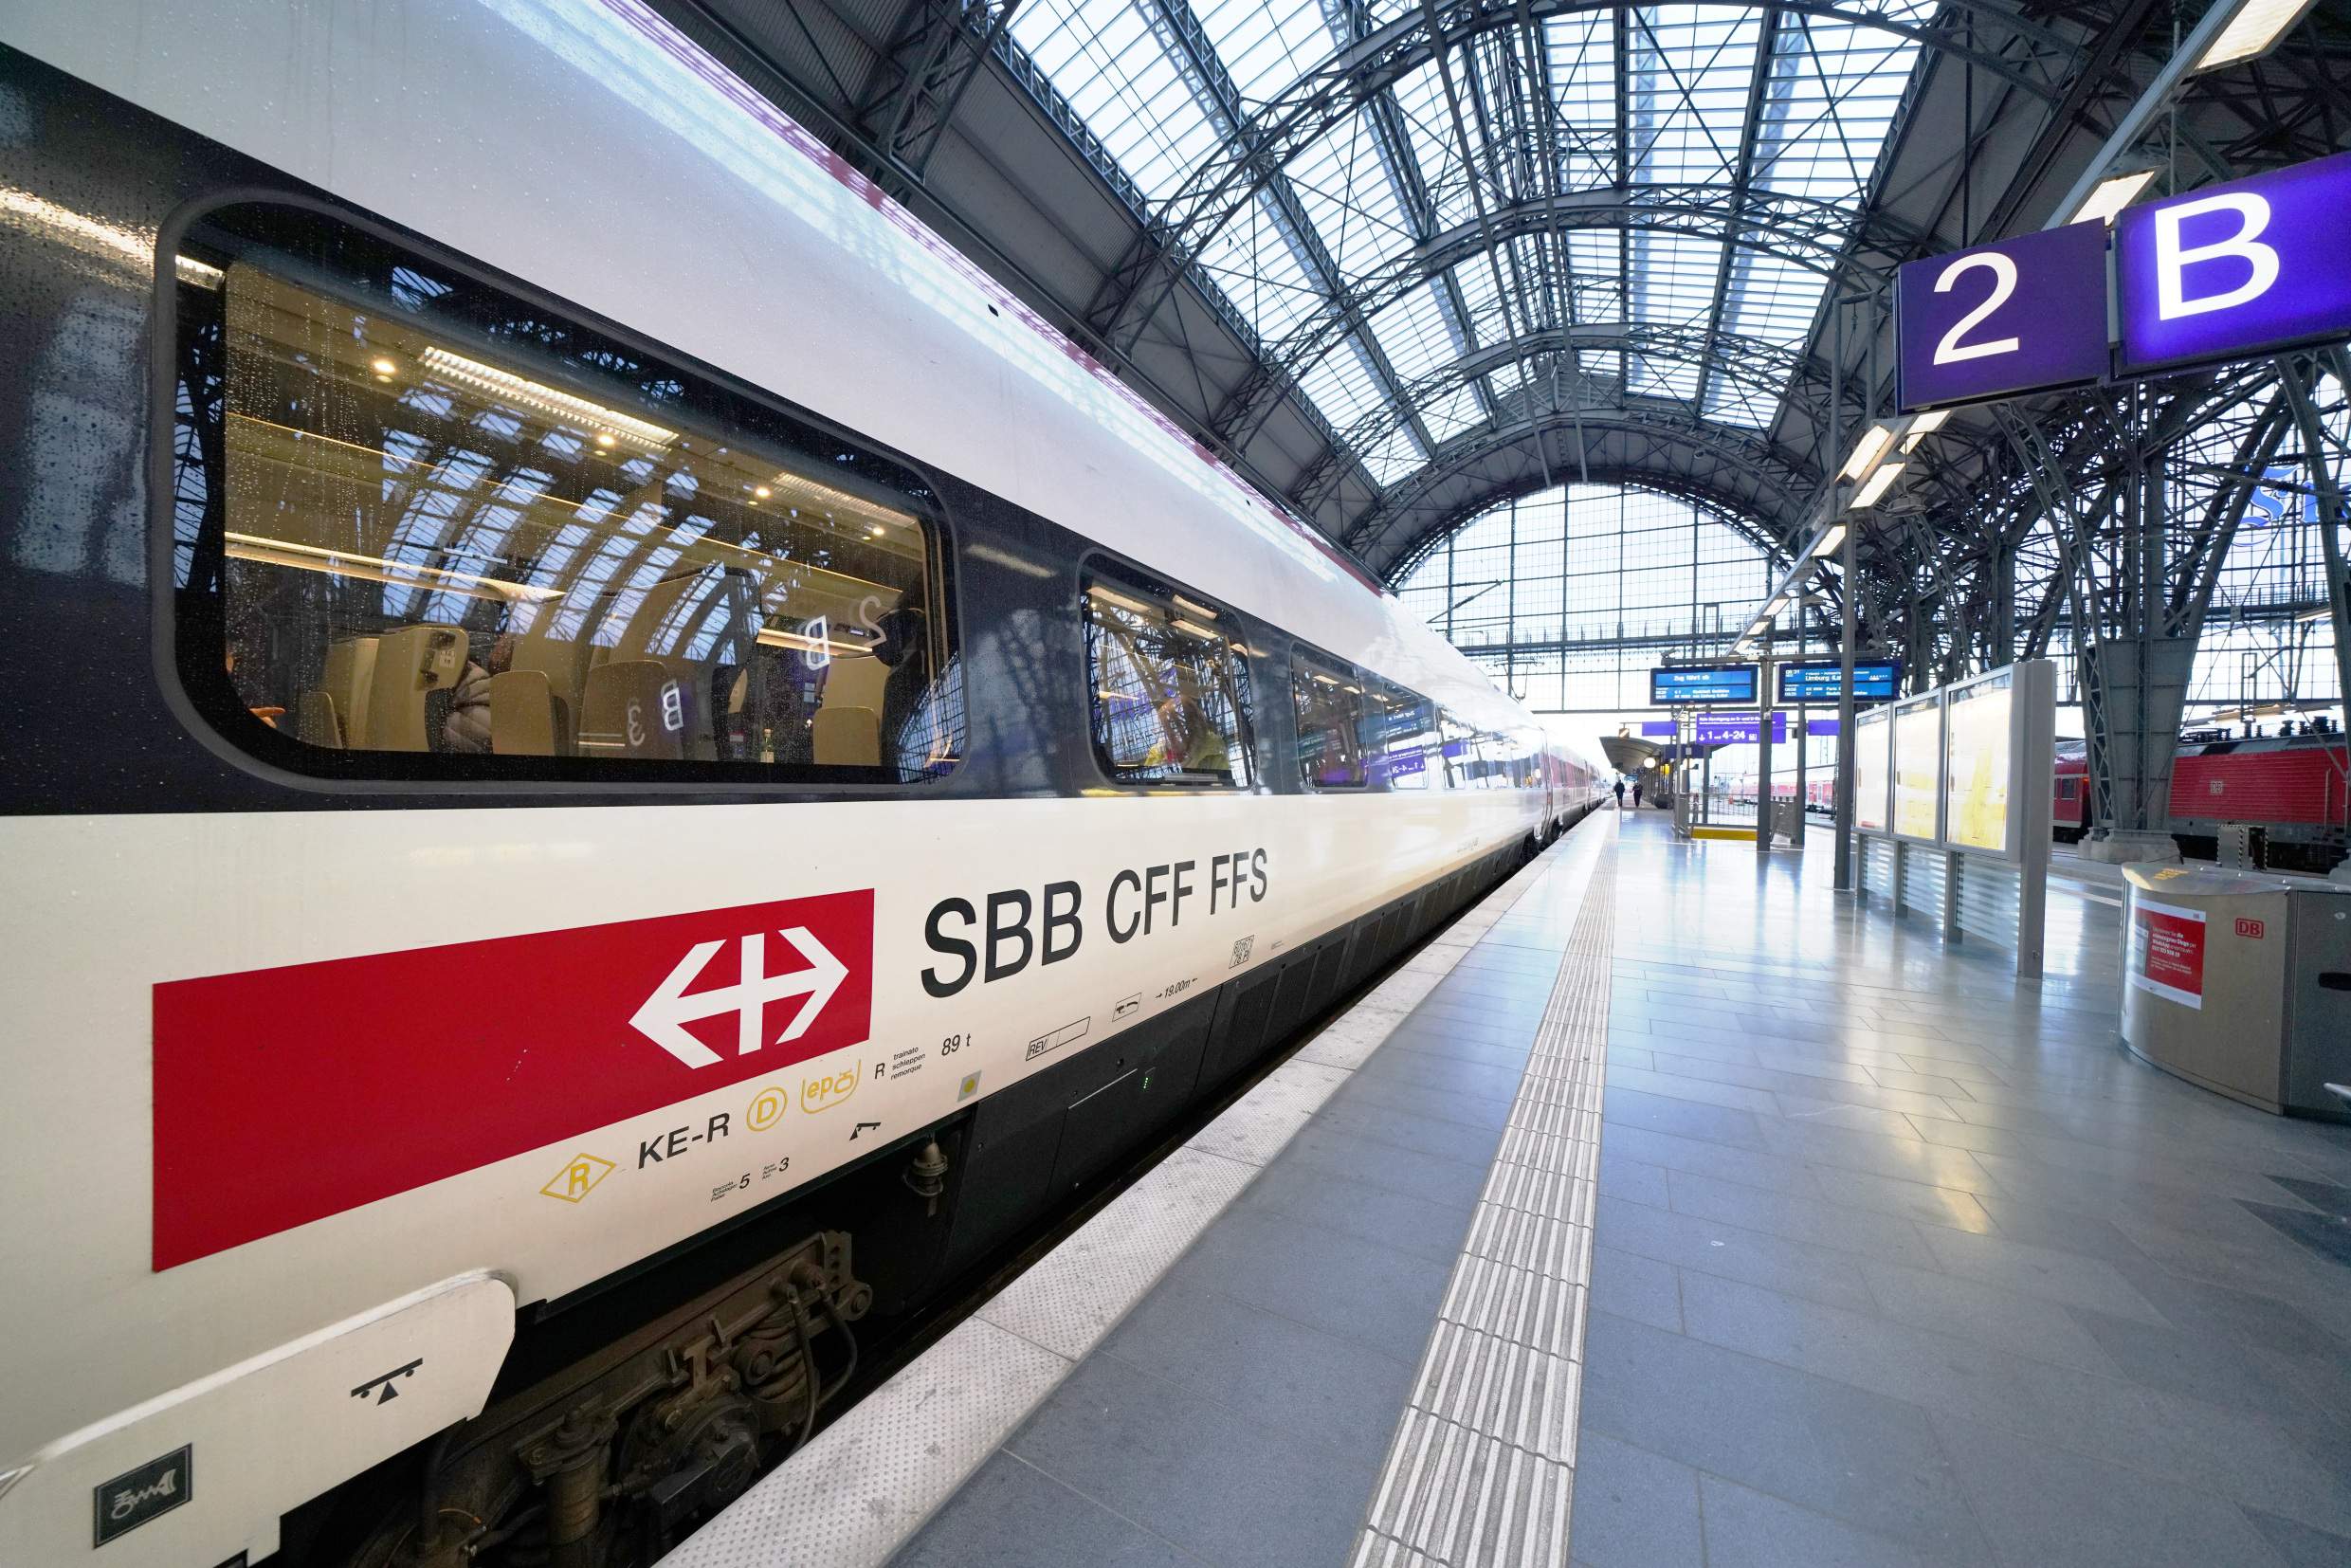 Cooperation with SBB